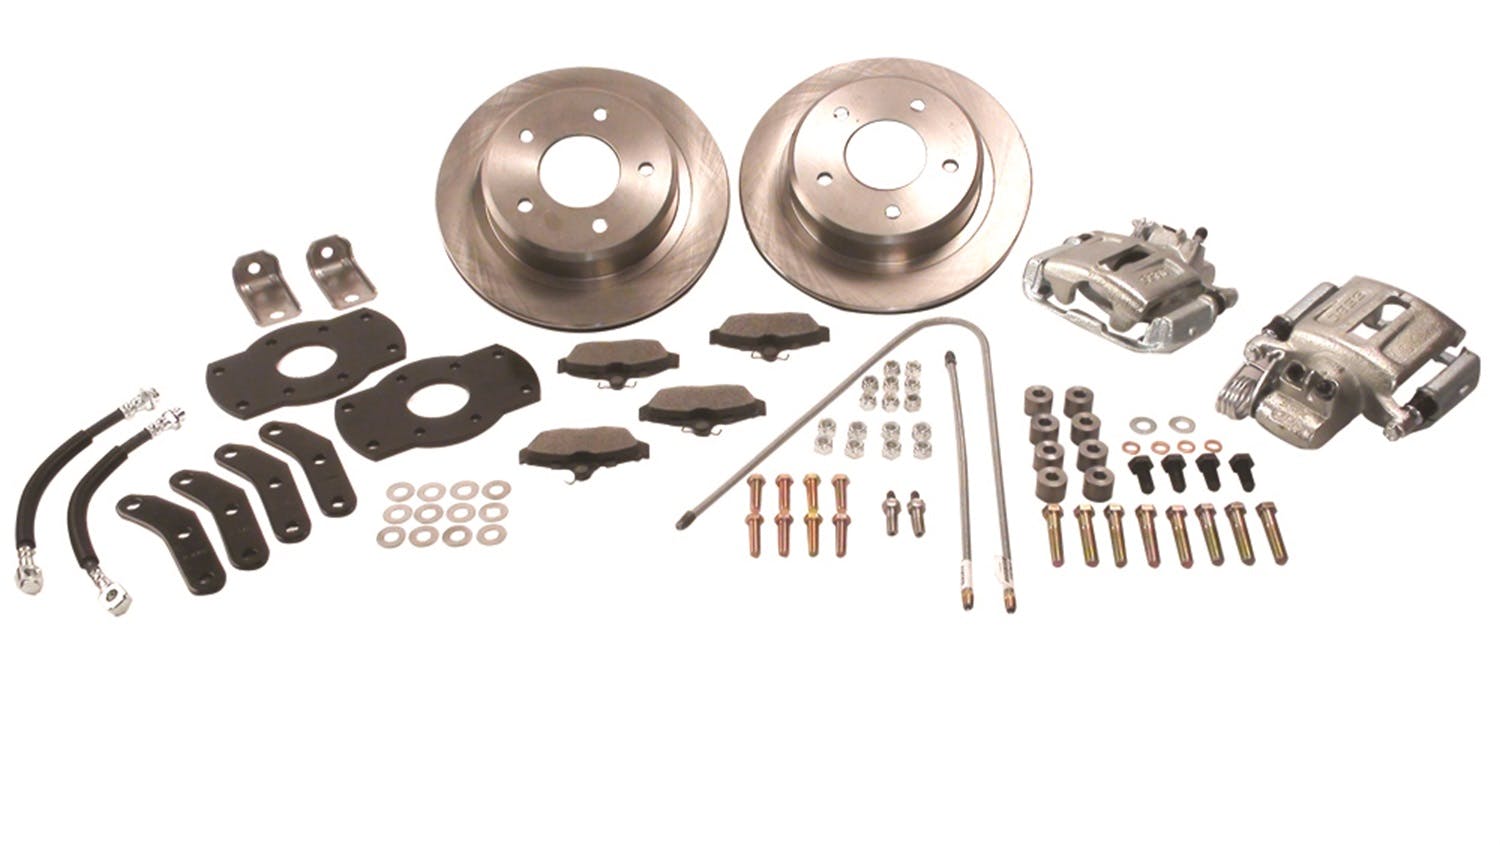 Stainless Steel Brakes A158-1BK Kit A158-1 w/black calipers